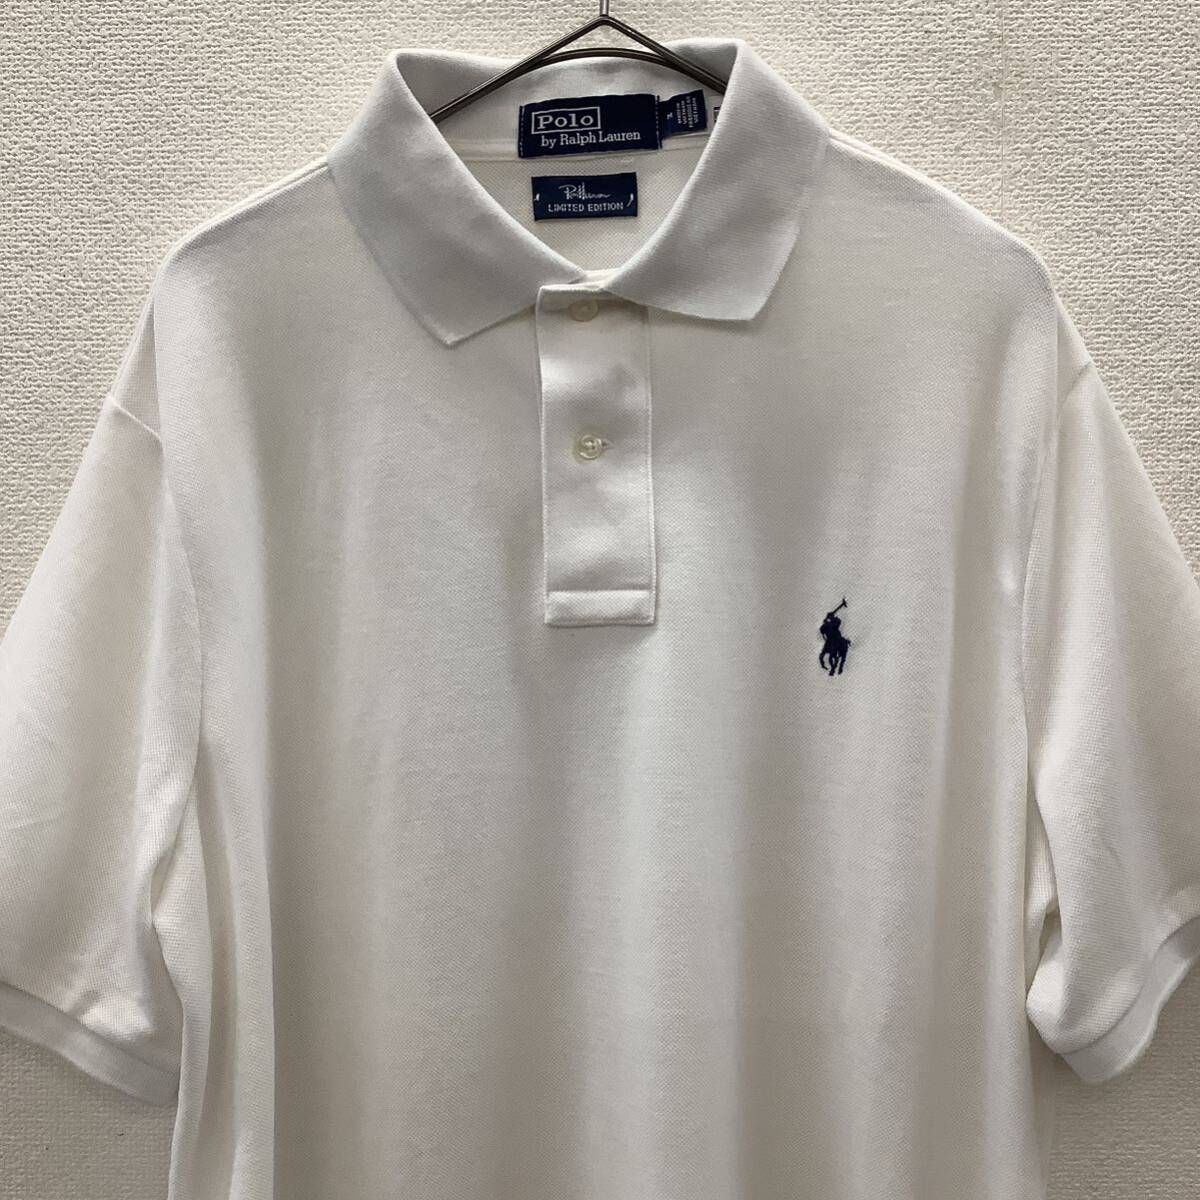 Polo Ralph Lauren for Ron Herman The Earth Polo ロンハーマン別注 ポロバイラルフローレン ポロシャツ ホワイト size M 77163の画像1